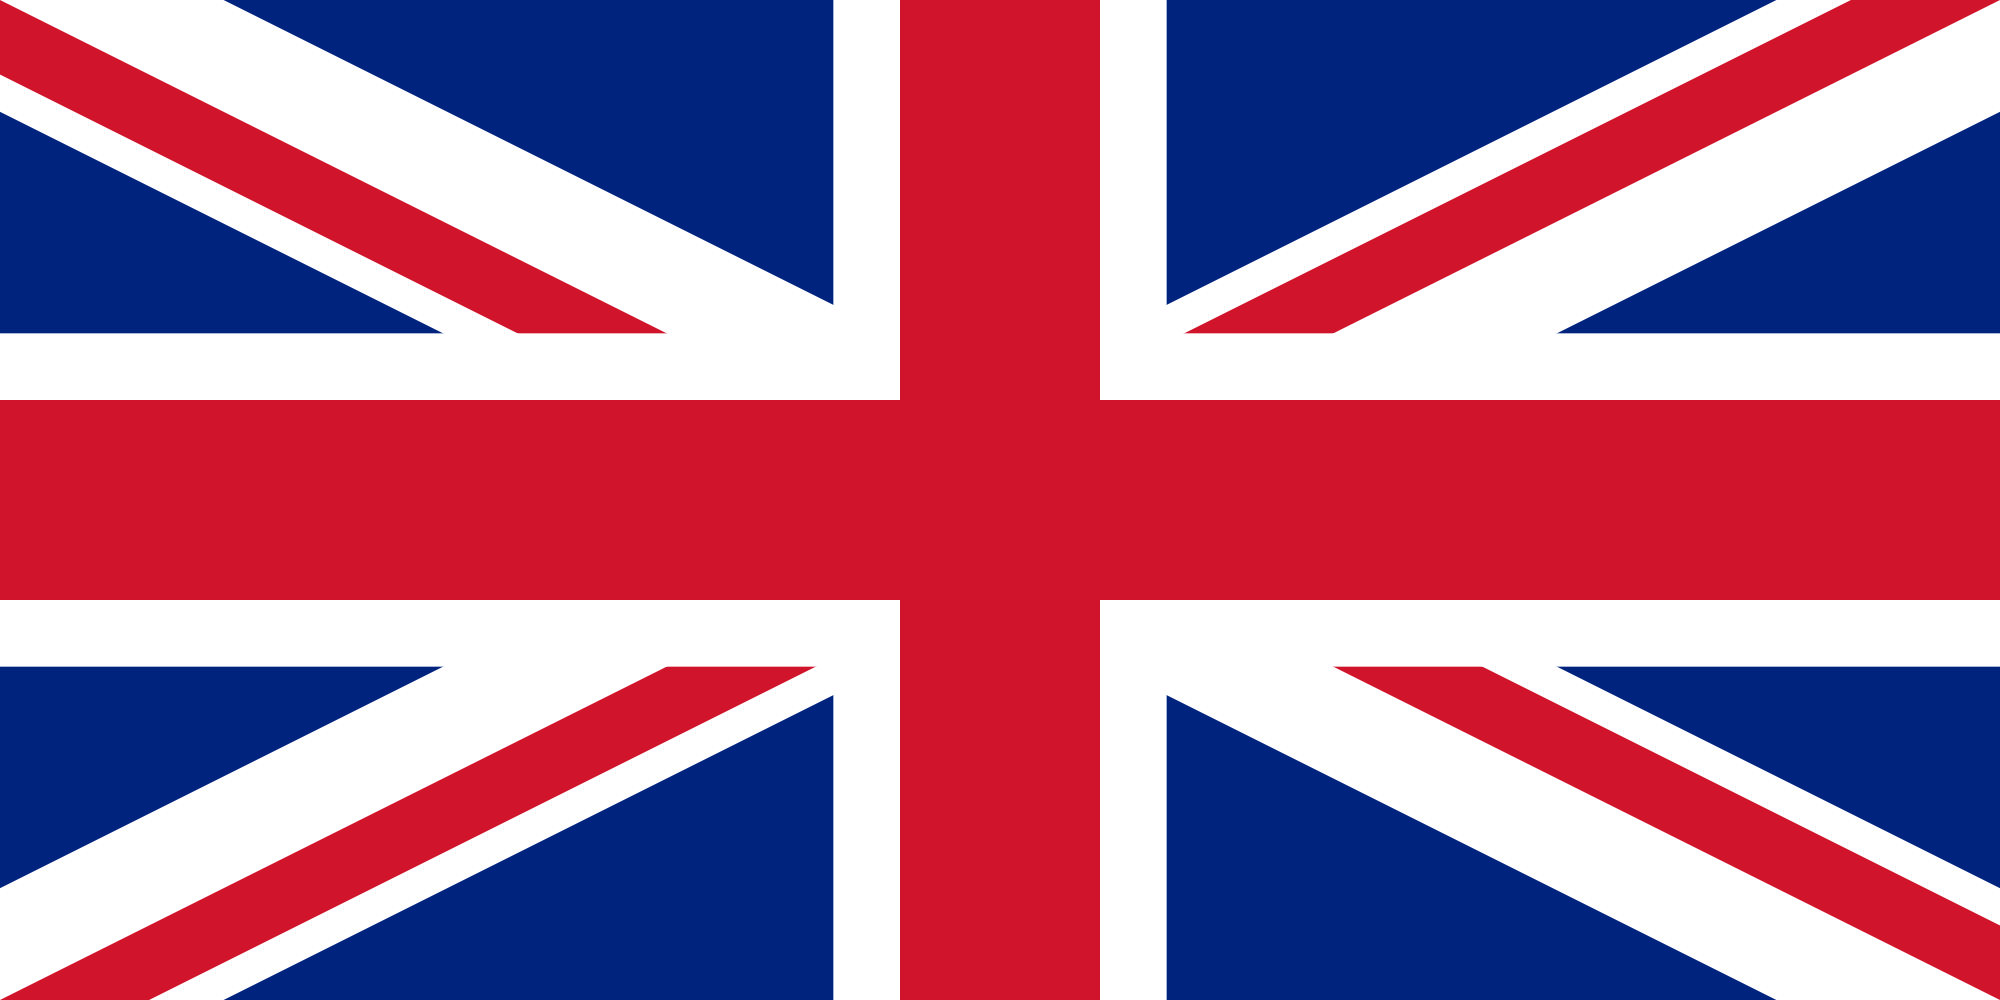 Confederation of Britain and Northern Ireland - Constructed worlds